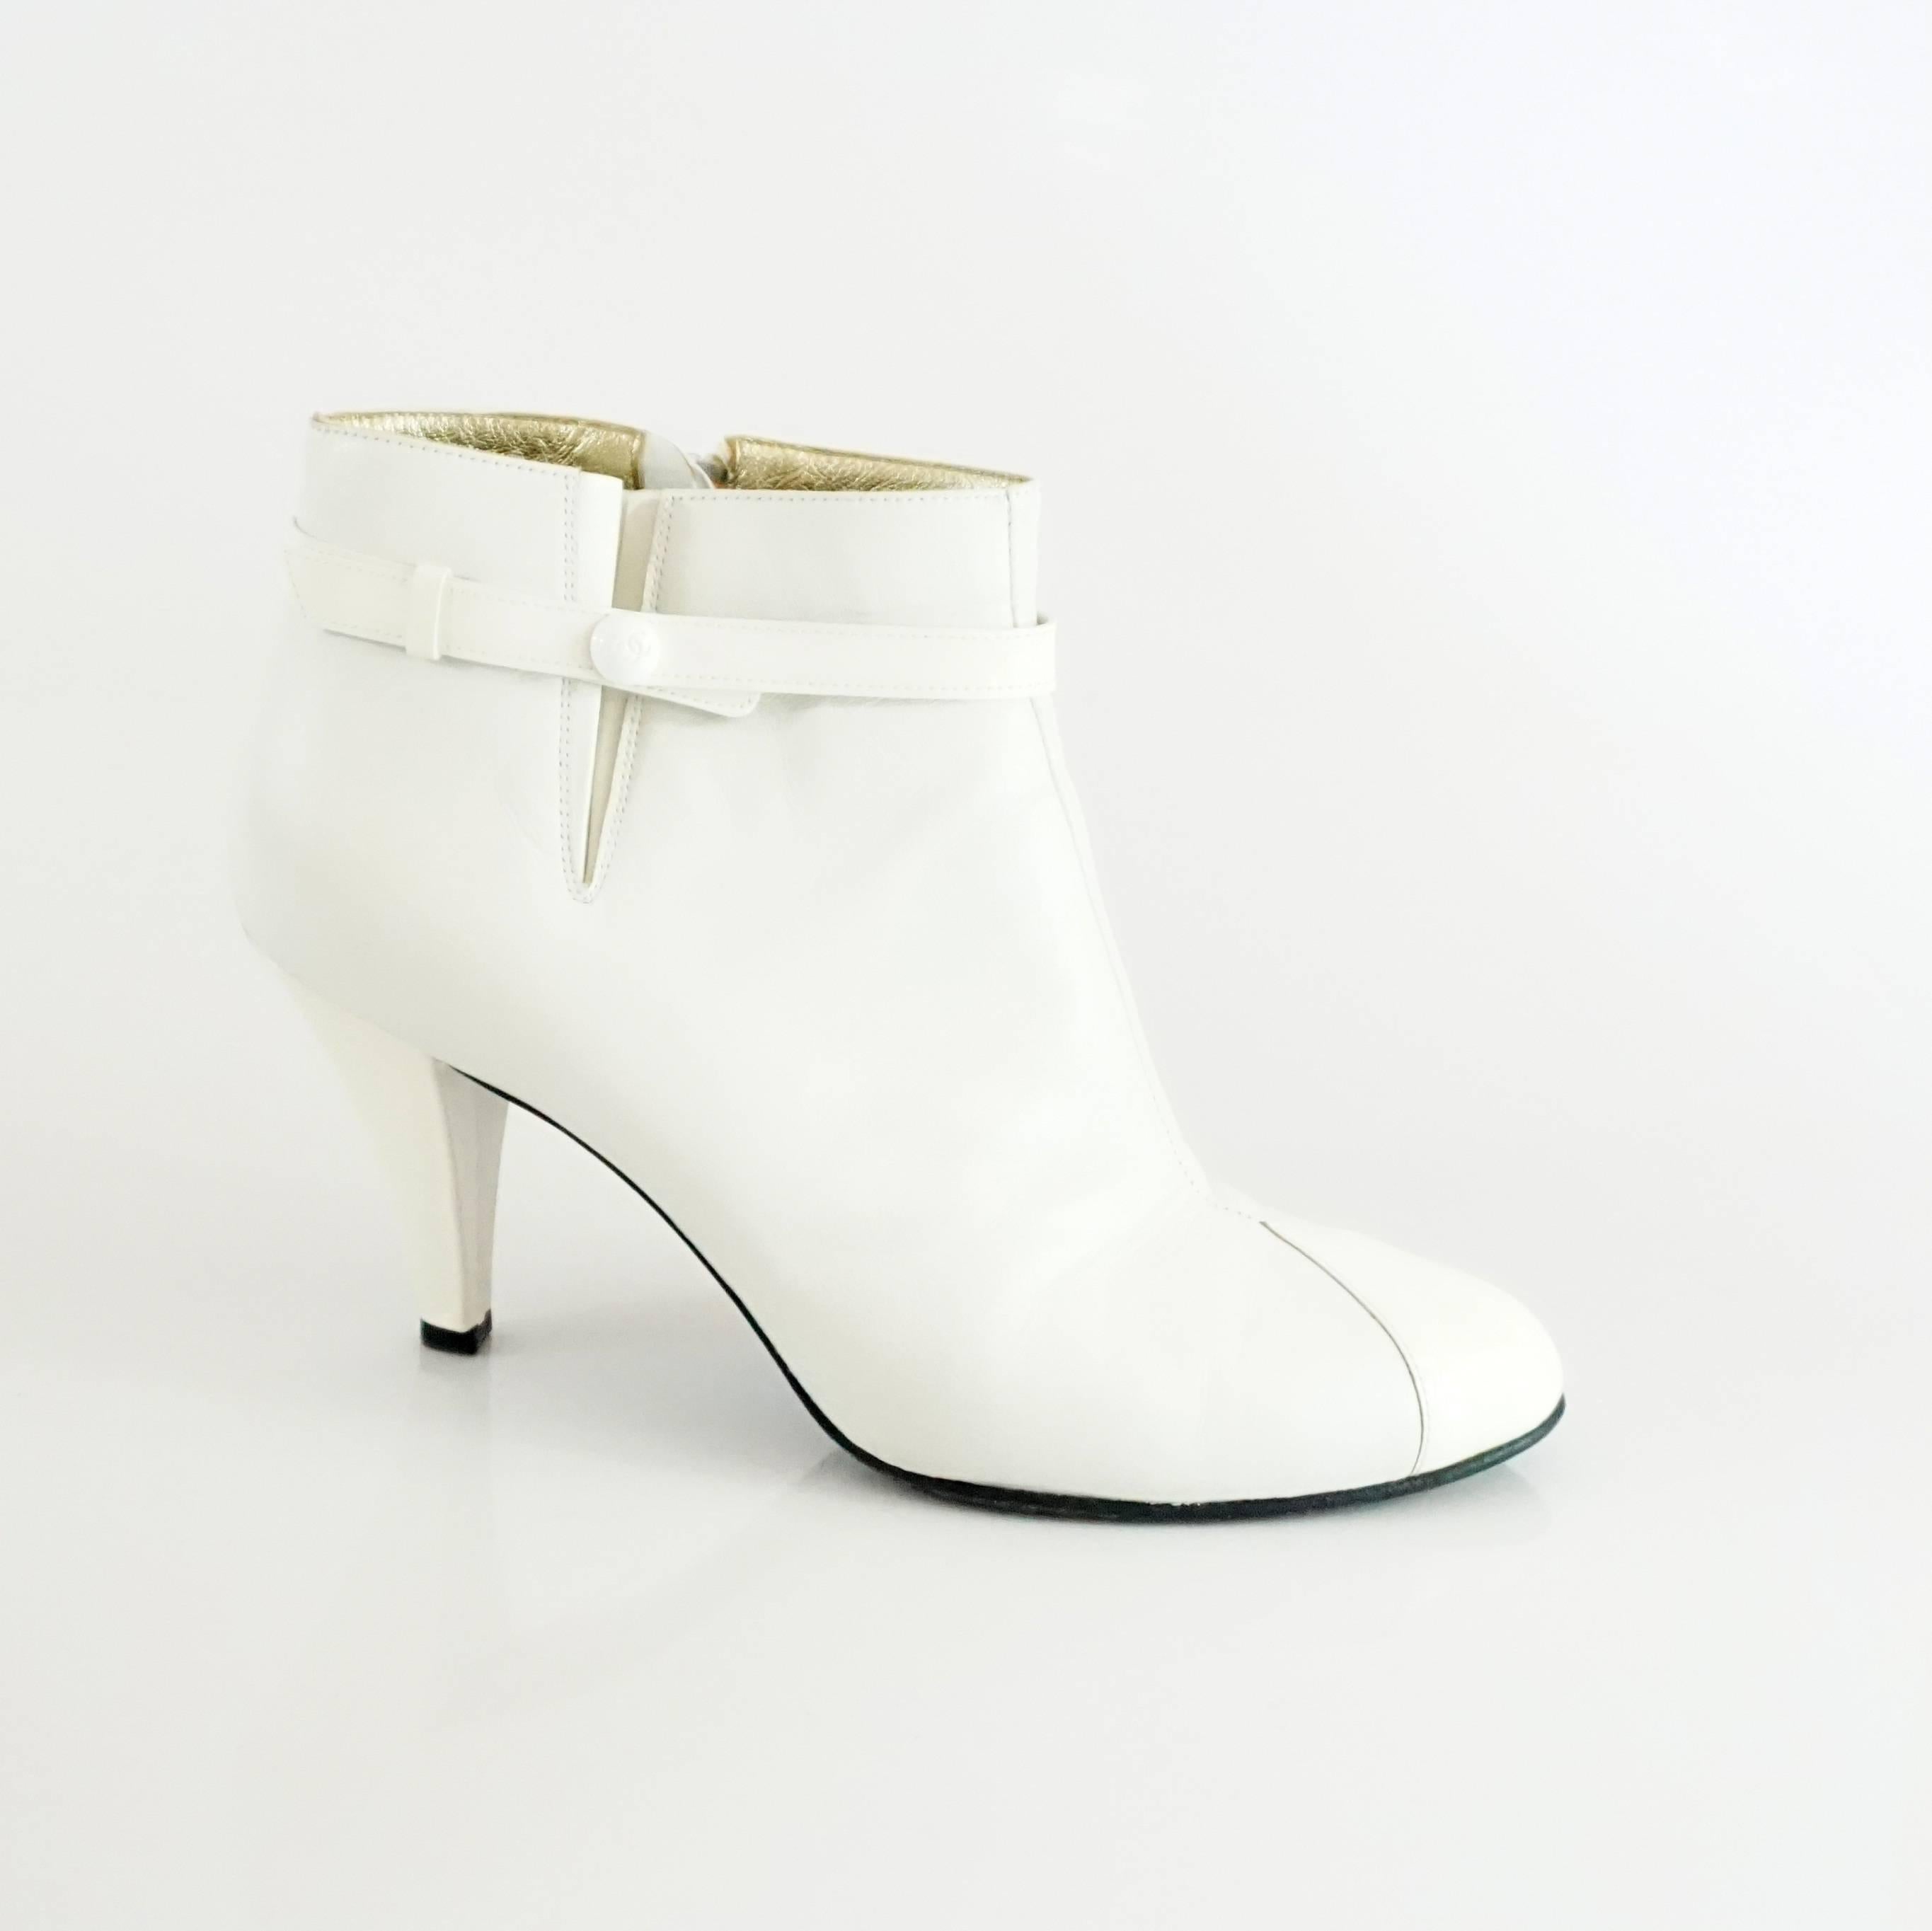 These Chanel white lambskin and patent leather booties are a modern staple. They have a side fold, ankle strap with 